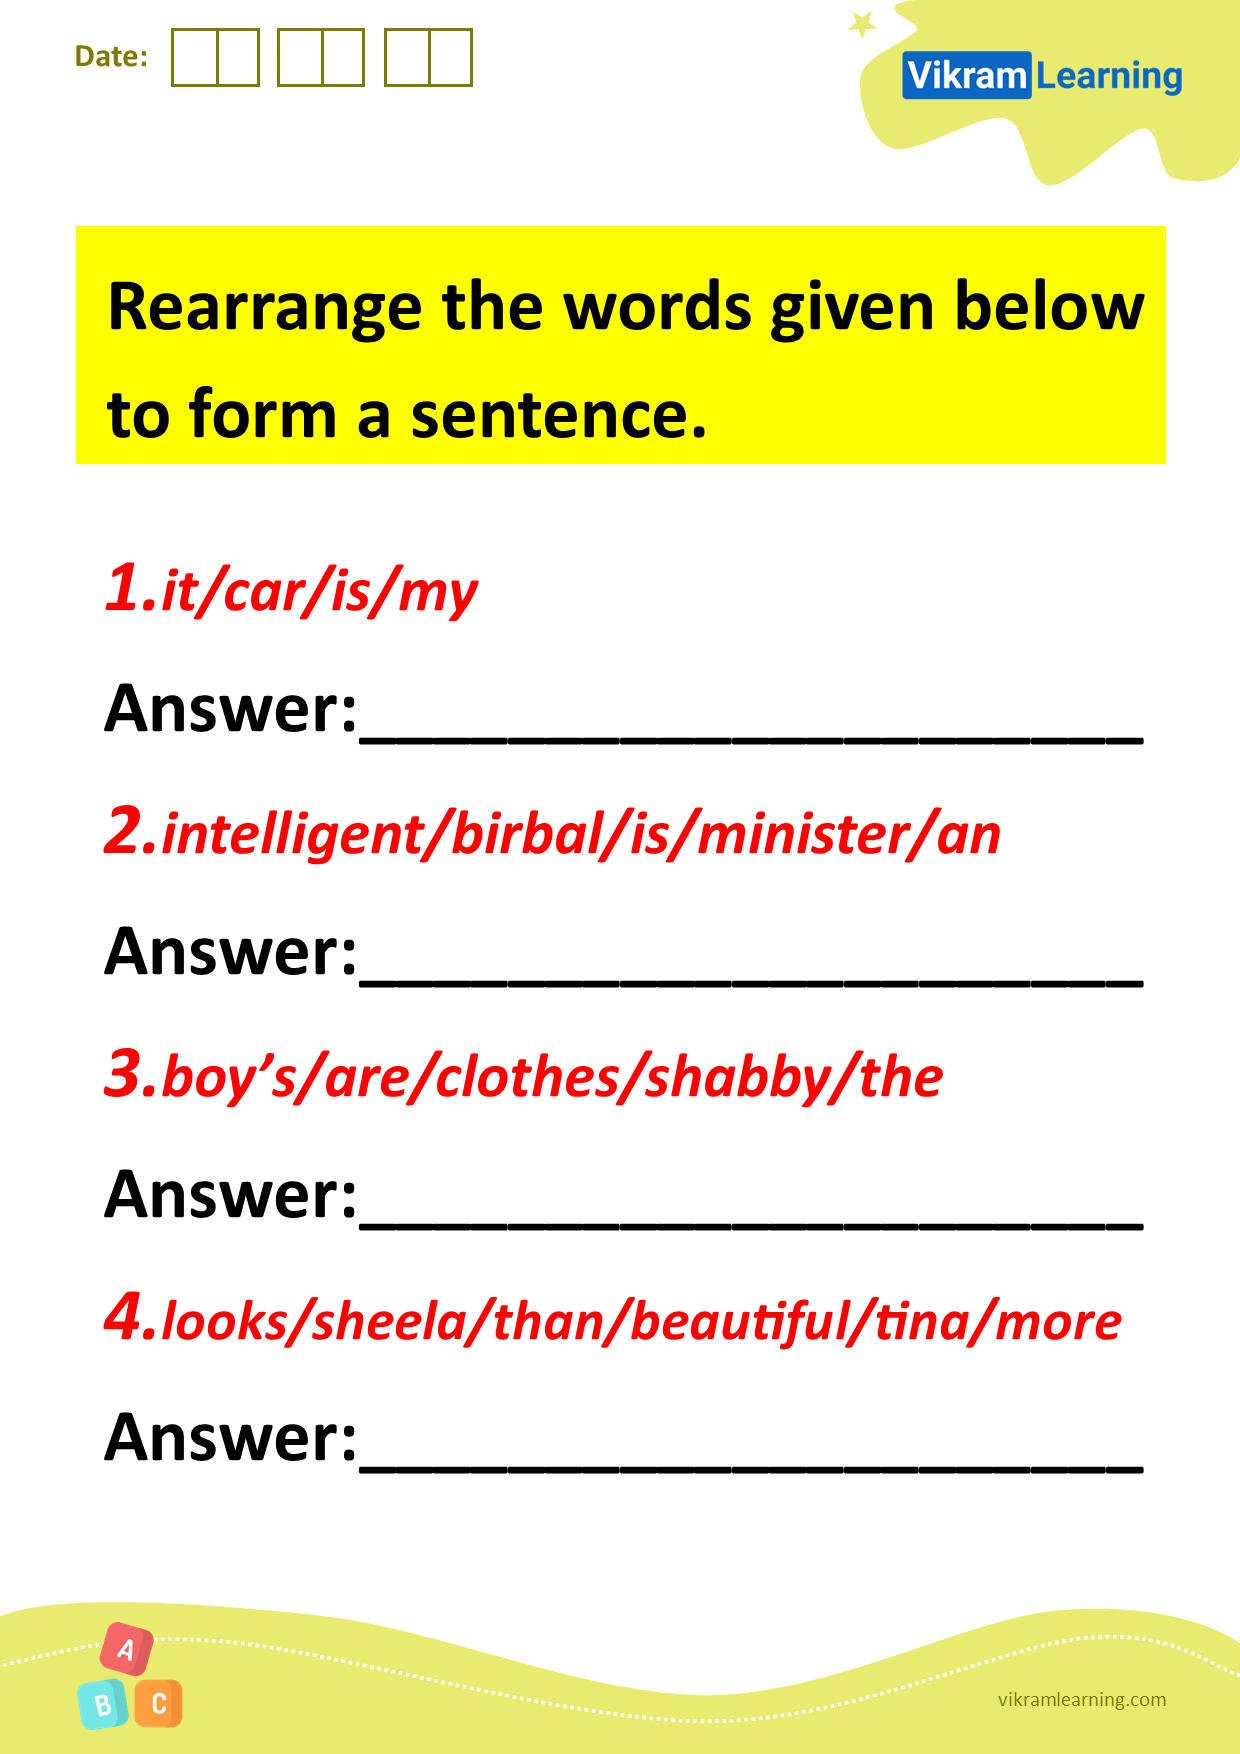 Download rearrange the words given below to form a sentence worksheets